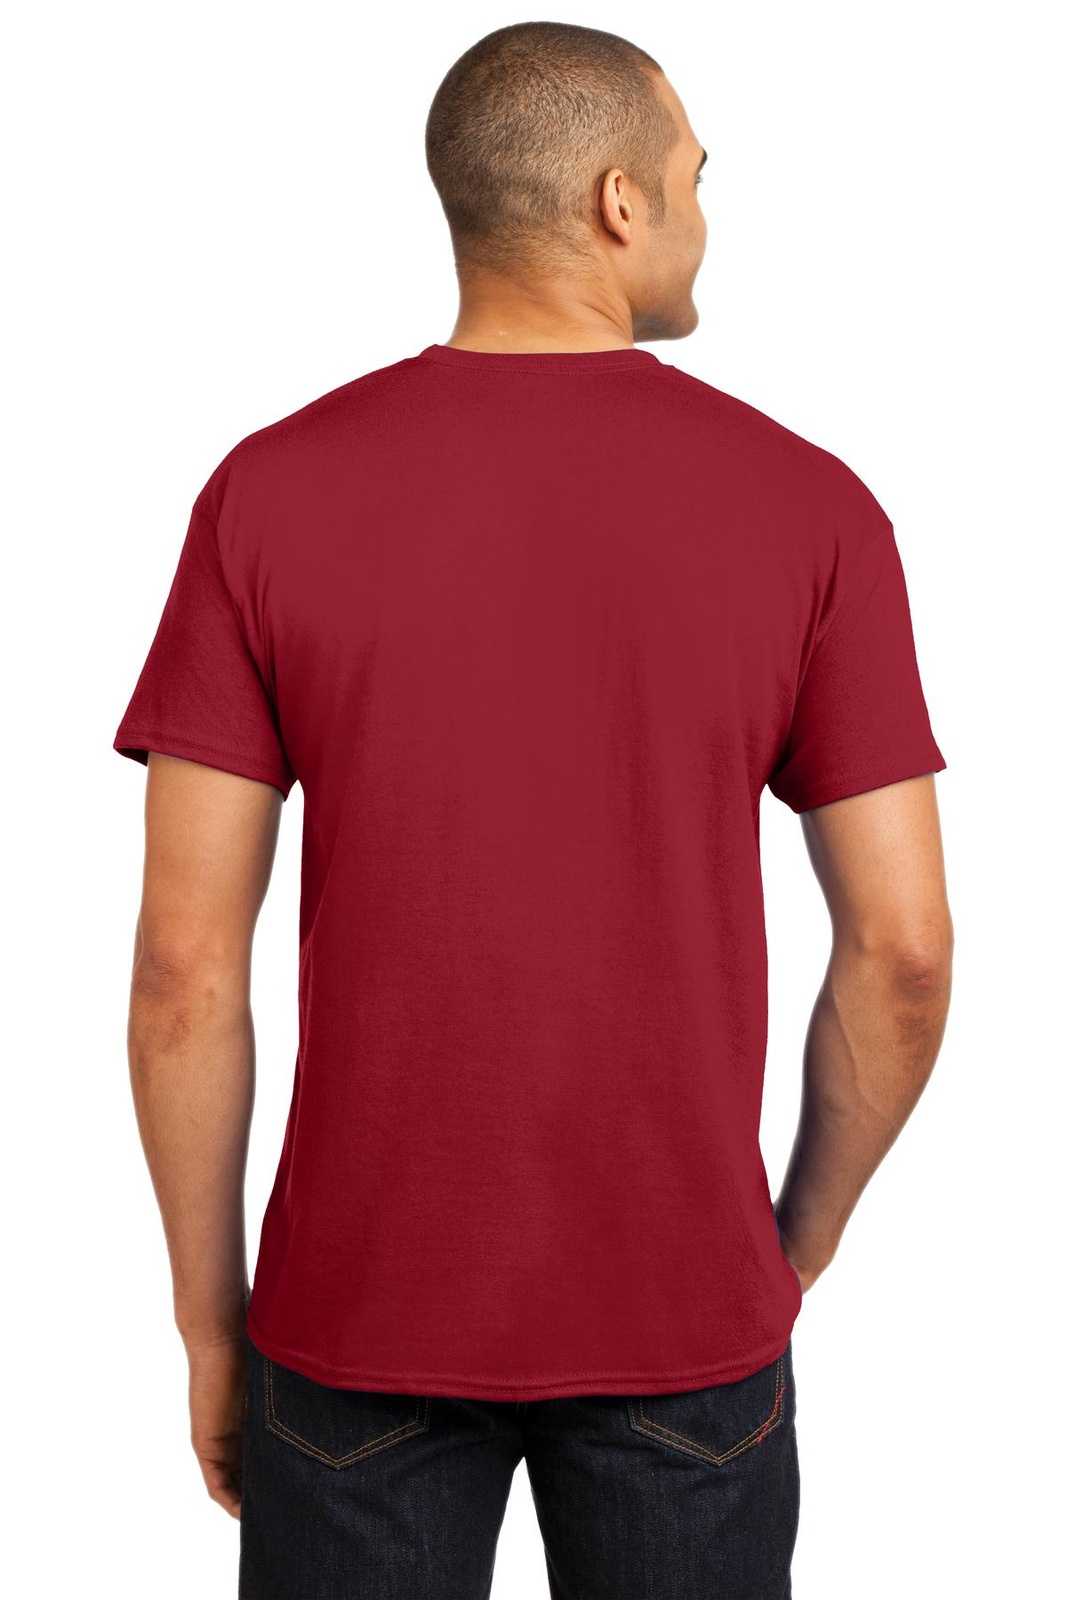 Hanes 5170 Ecosmart 50/50 Cotton/Poly T-Shirt - Deep Red - HIT a Double